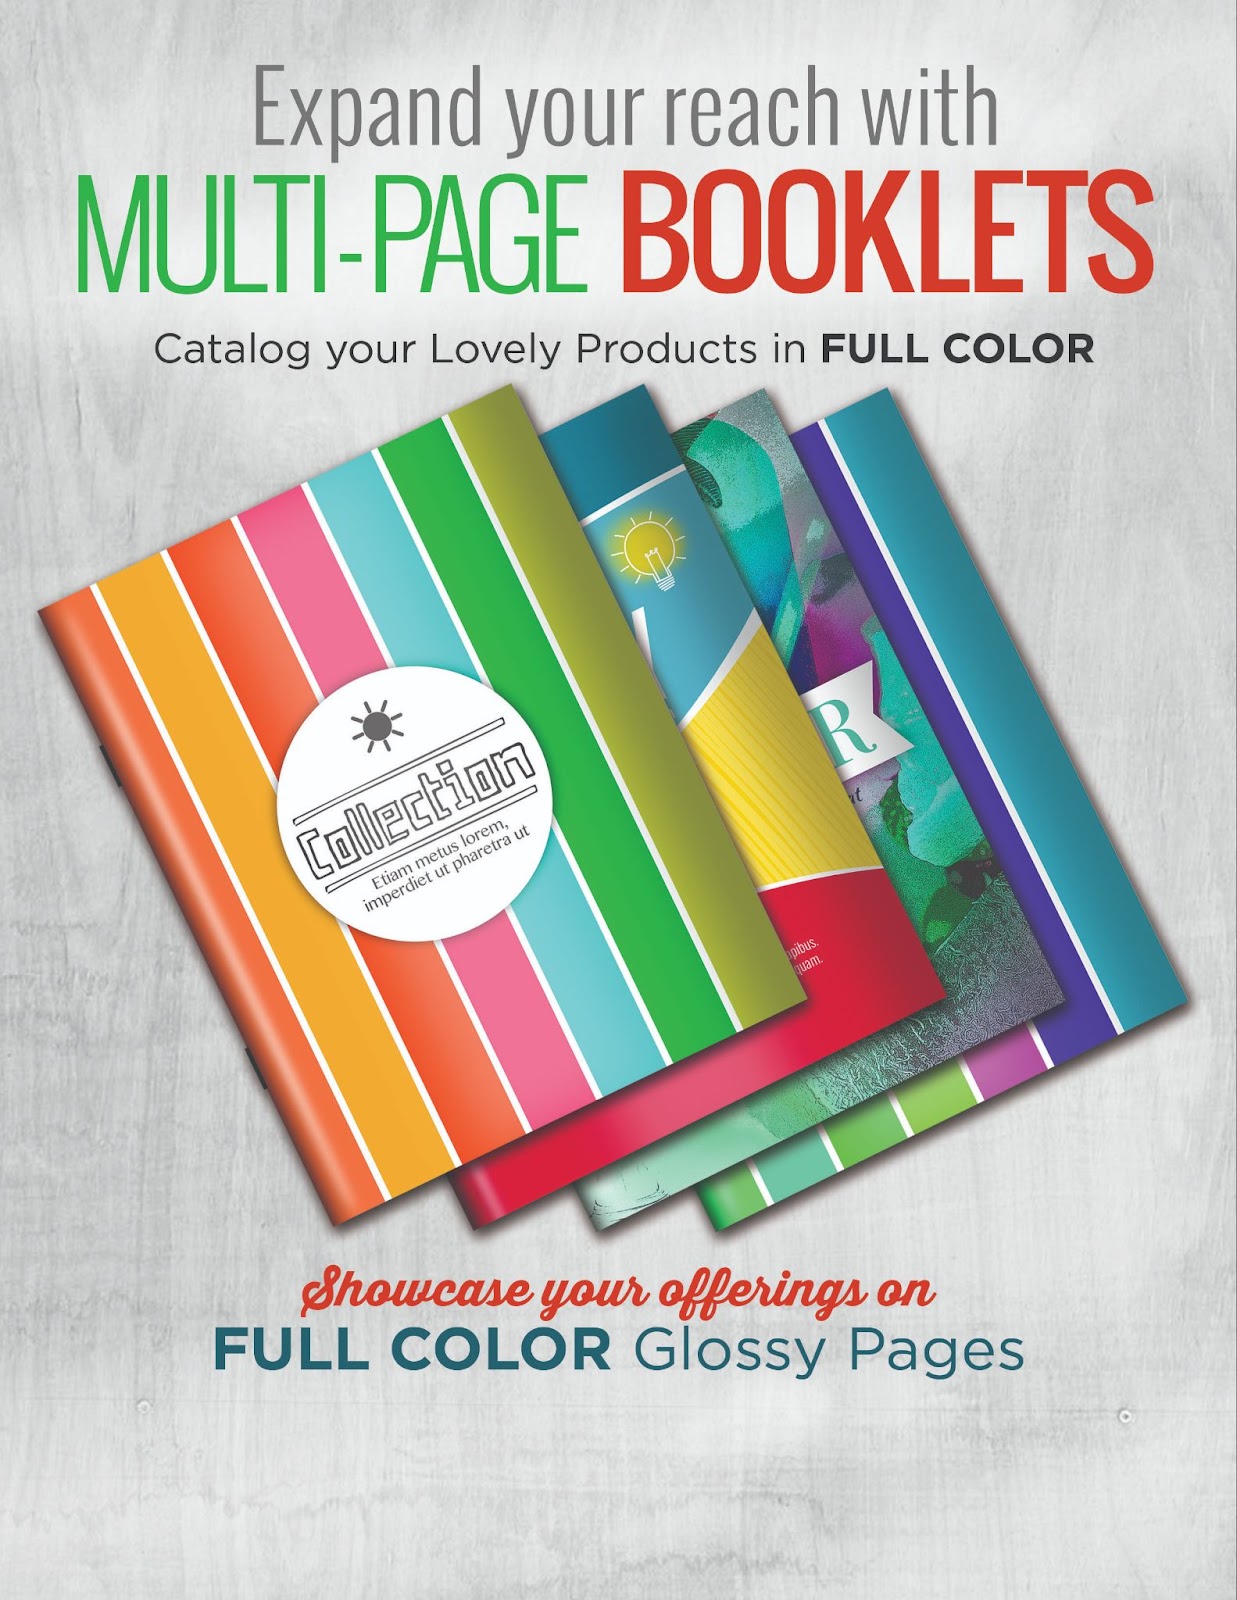 Multi-page booklets